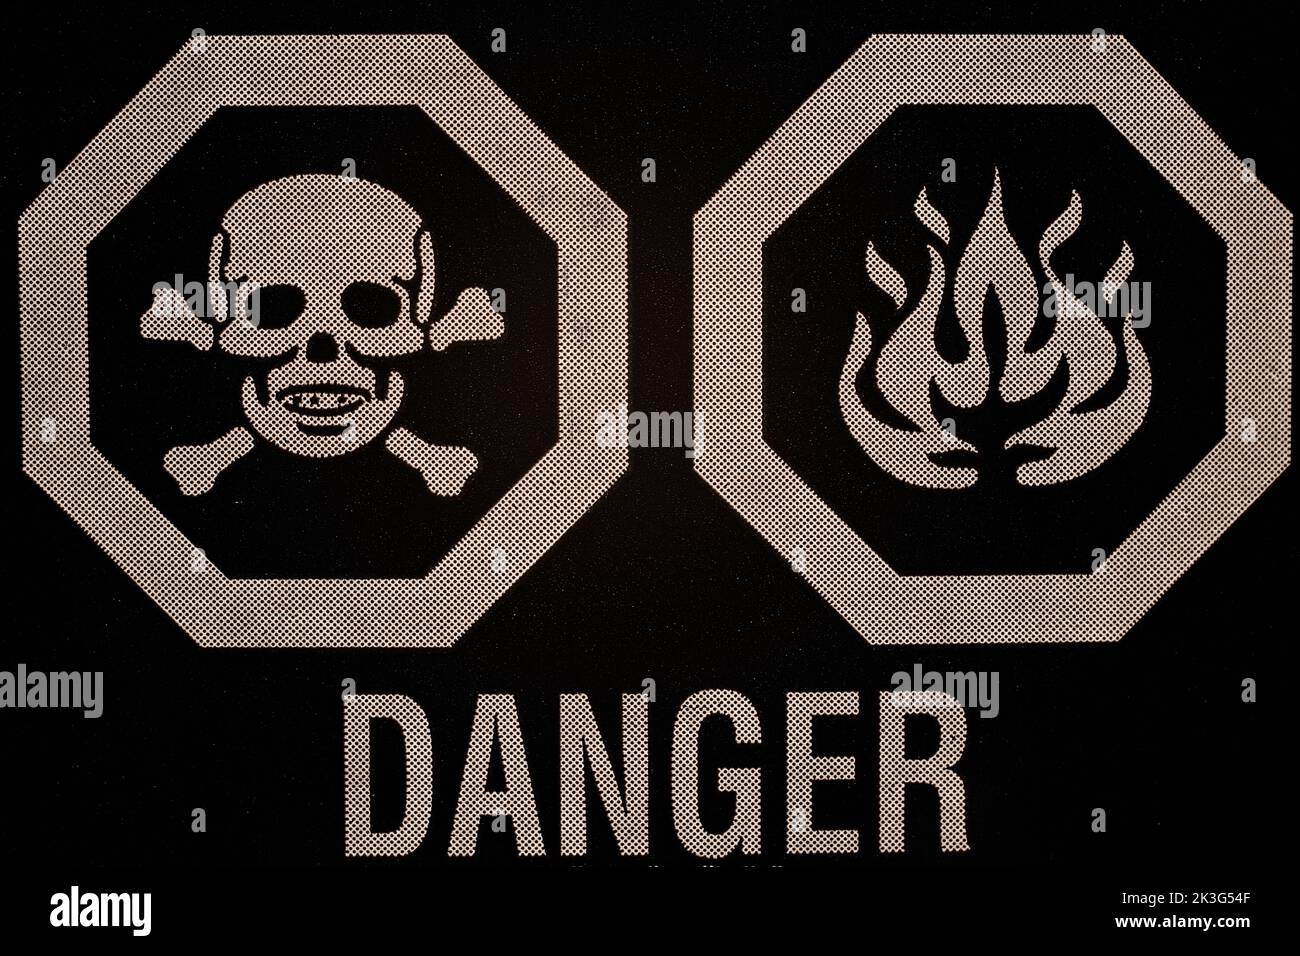 Danger poisonous fire hazard pictogram label on consumer product packaging. Stock Photo